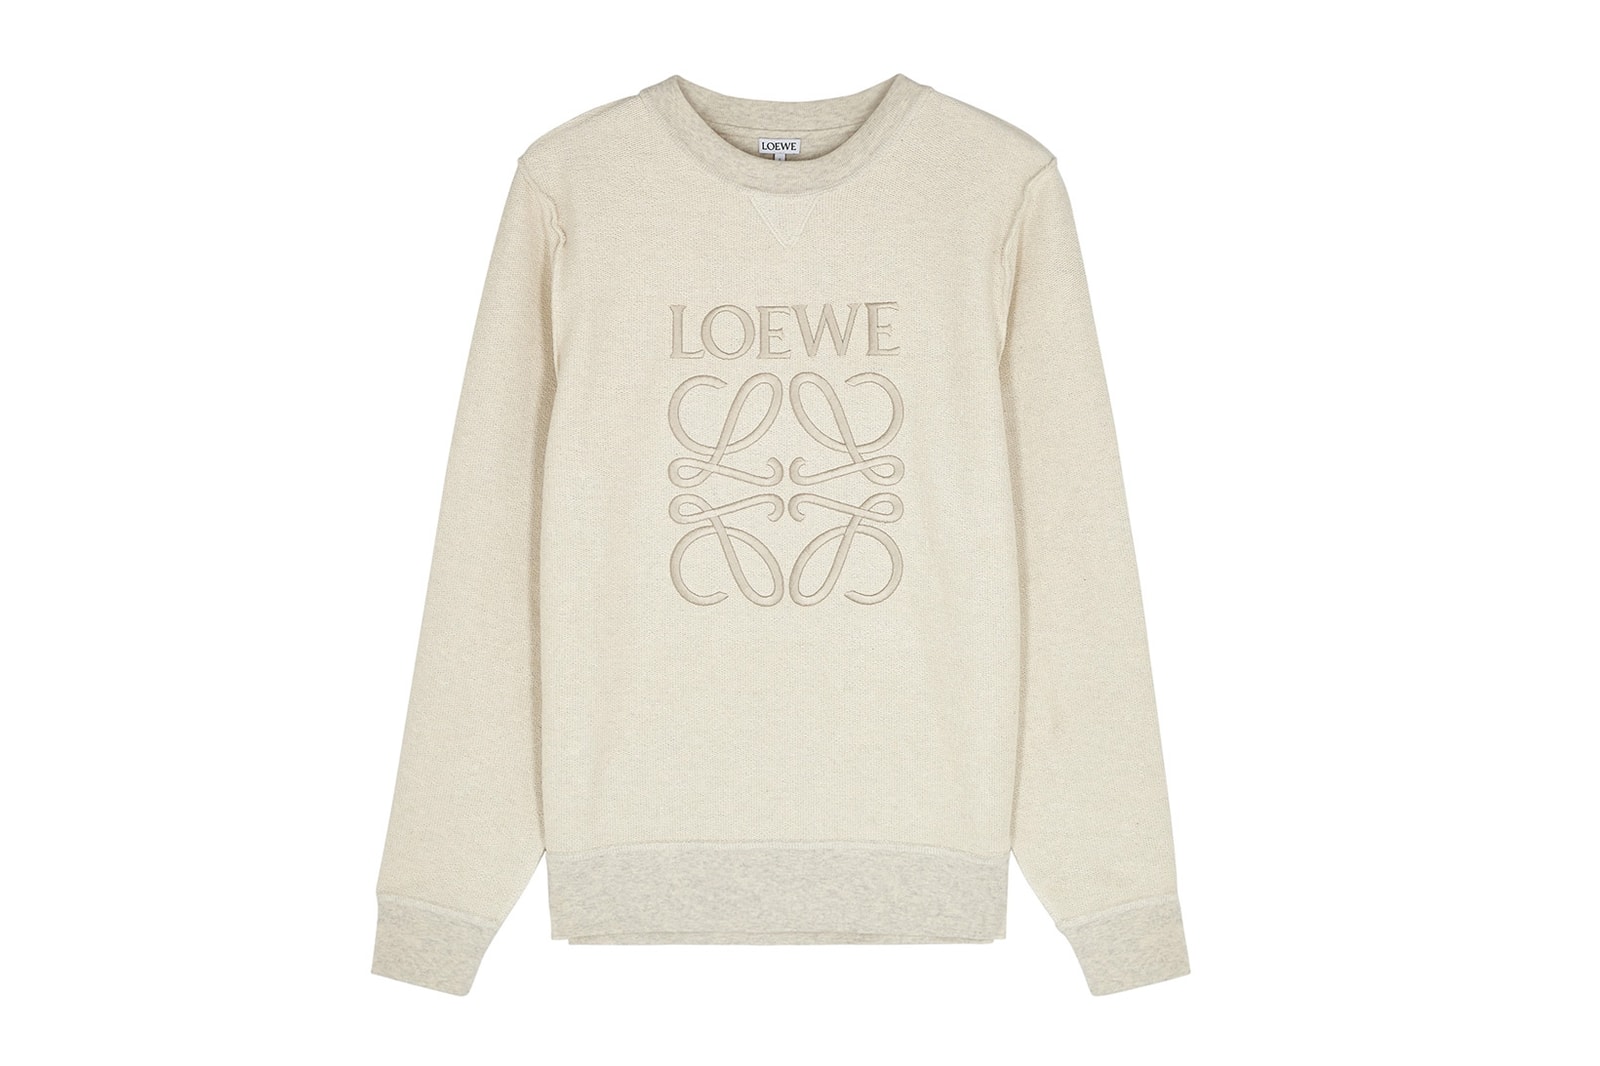 Comfy Chic Tops Sweaters Knitwear Cardigans Shirts Tees Jacquemus GANNI 